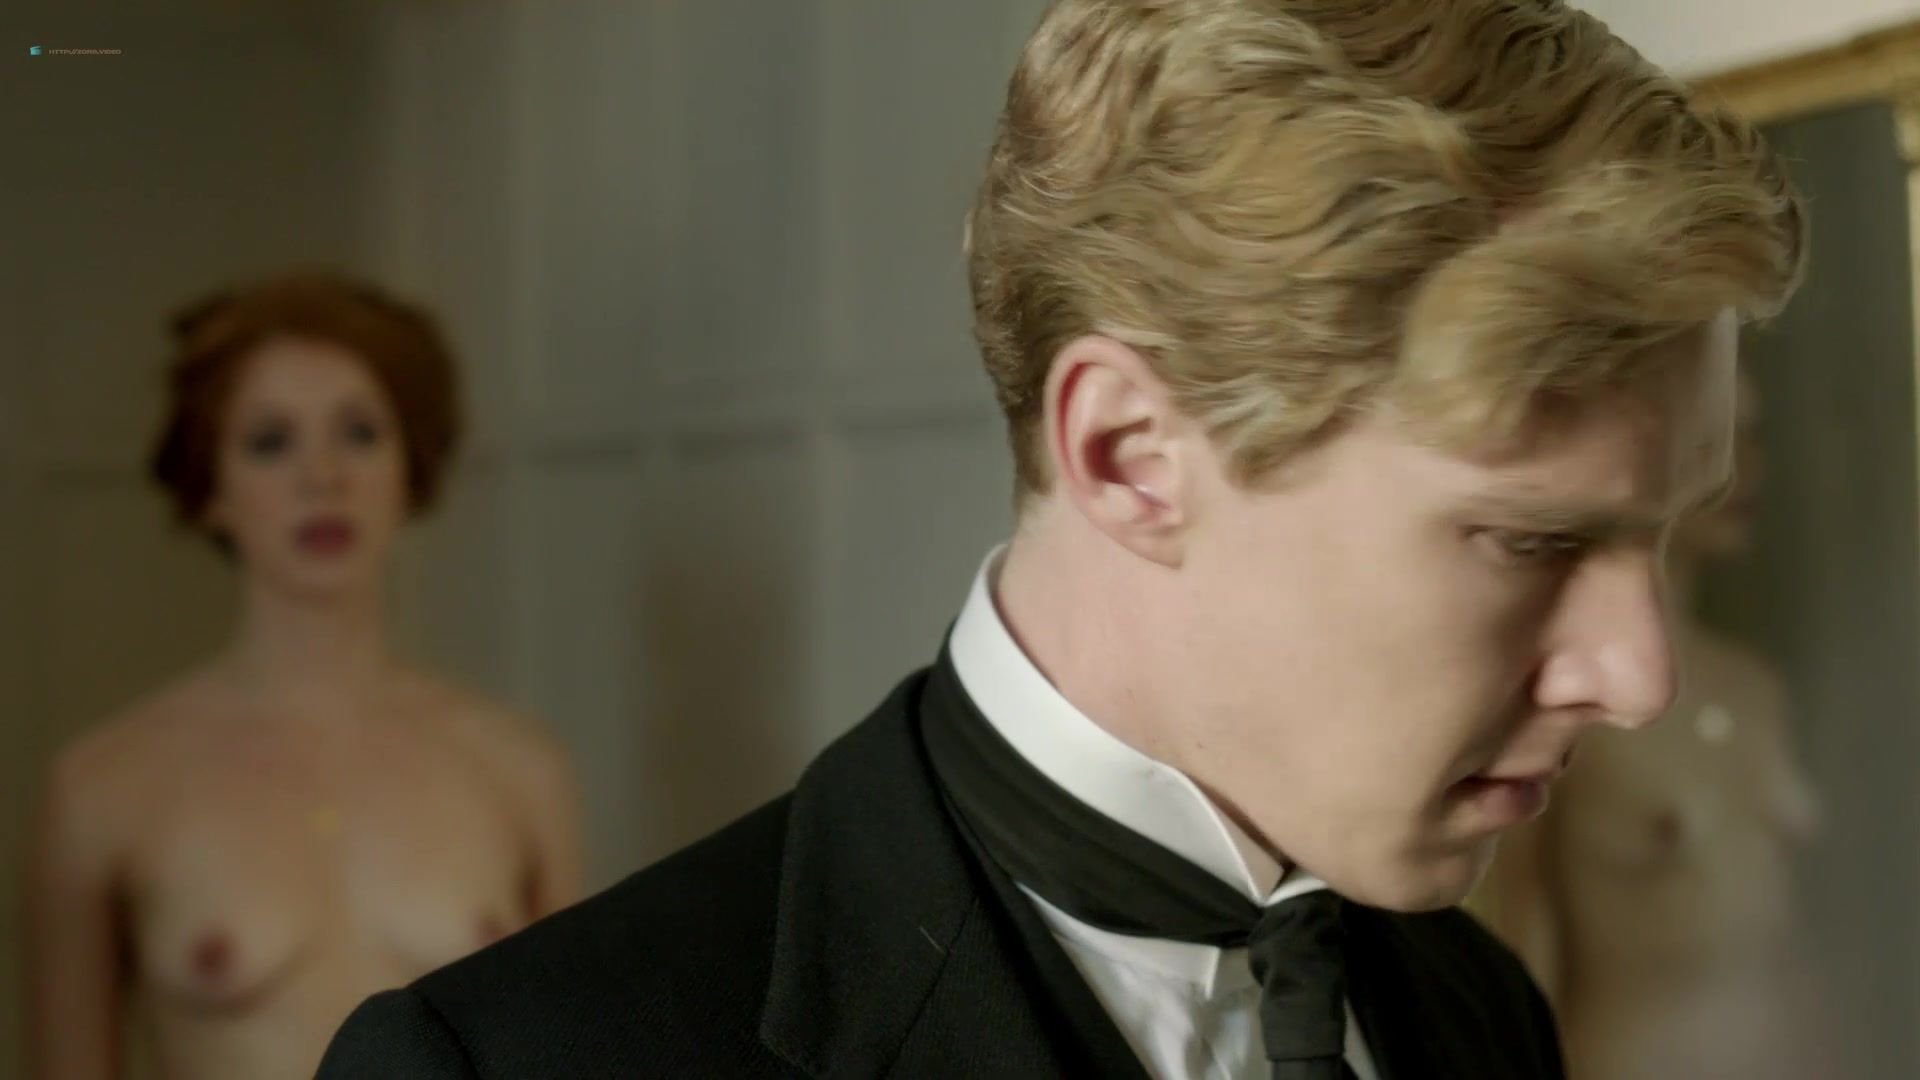 Spreading Rebecca Hall, Adelaide Clemens nude - Parades End (2012) Jap